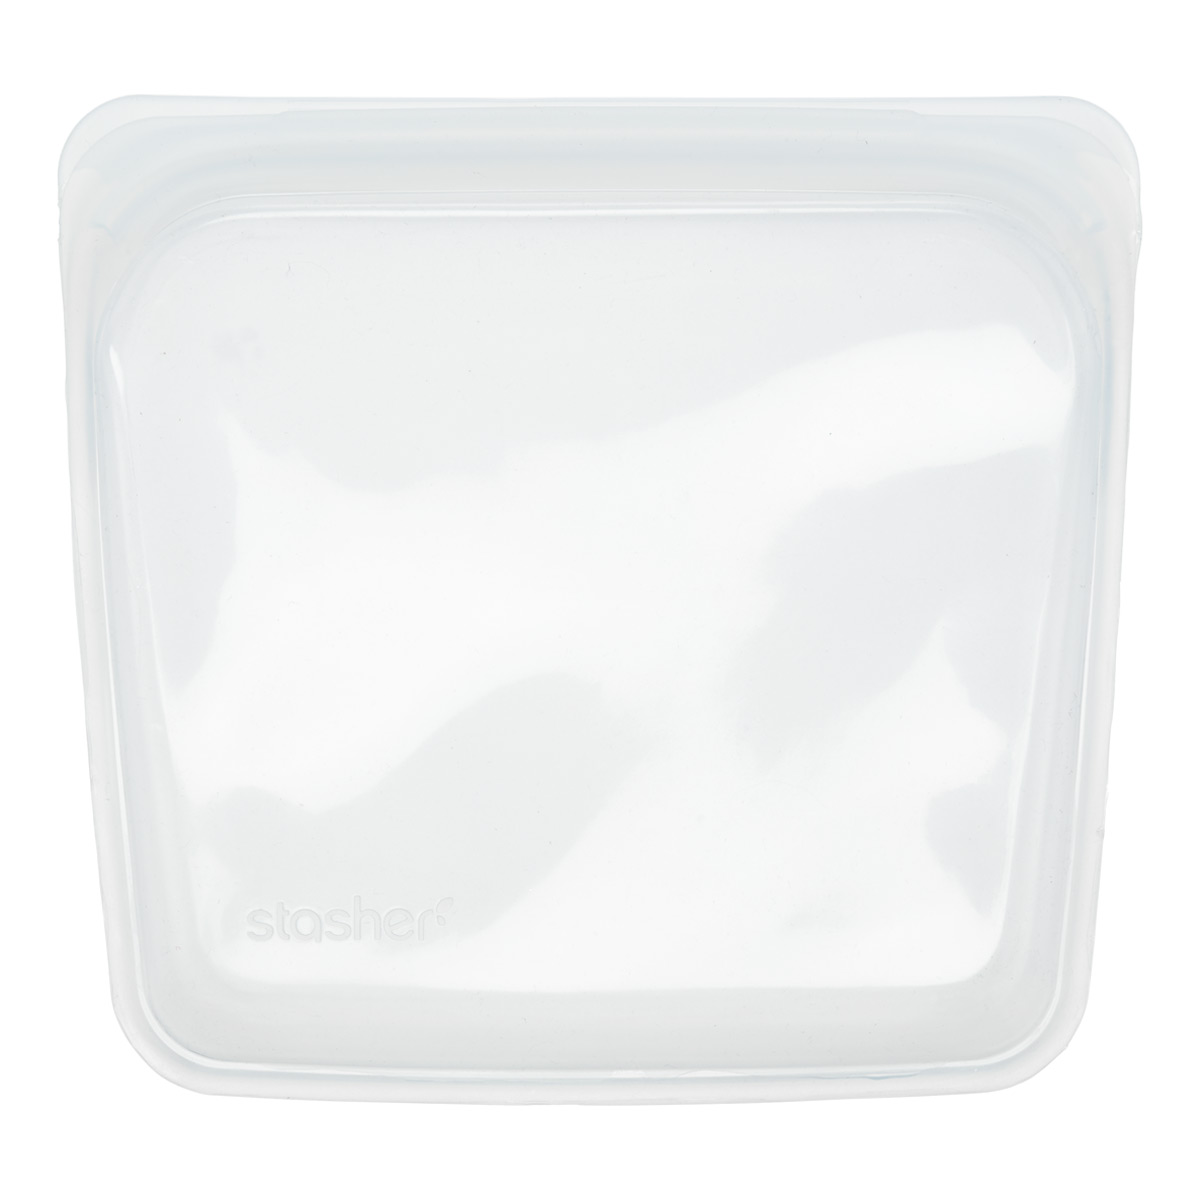 Stasher® Reusable Silicone Storage Bag - Clear, 0.5 gal - Kroger